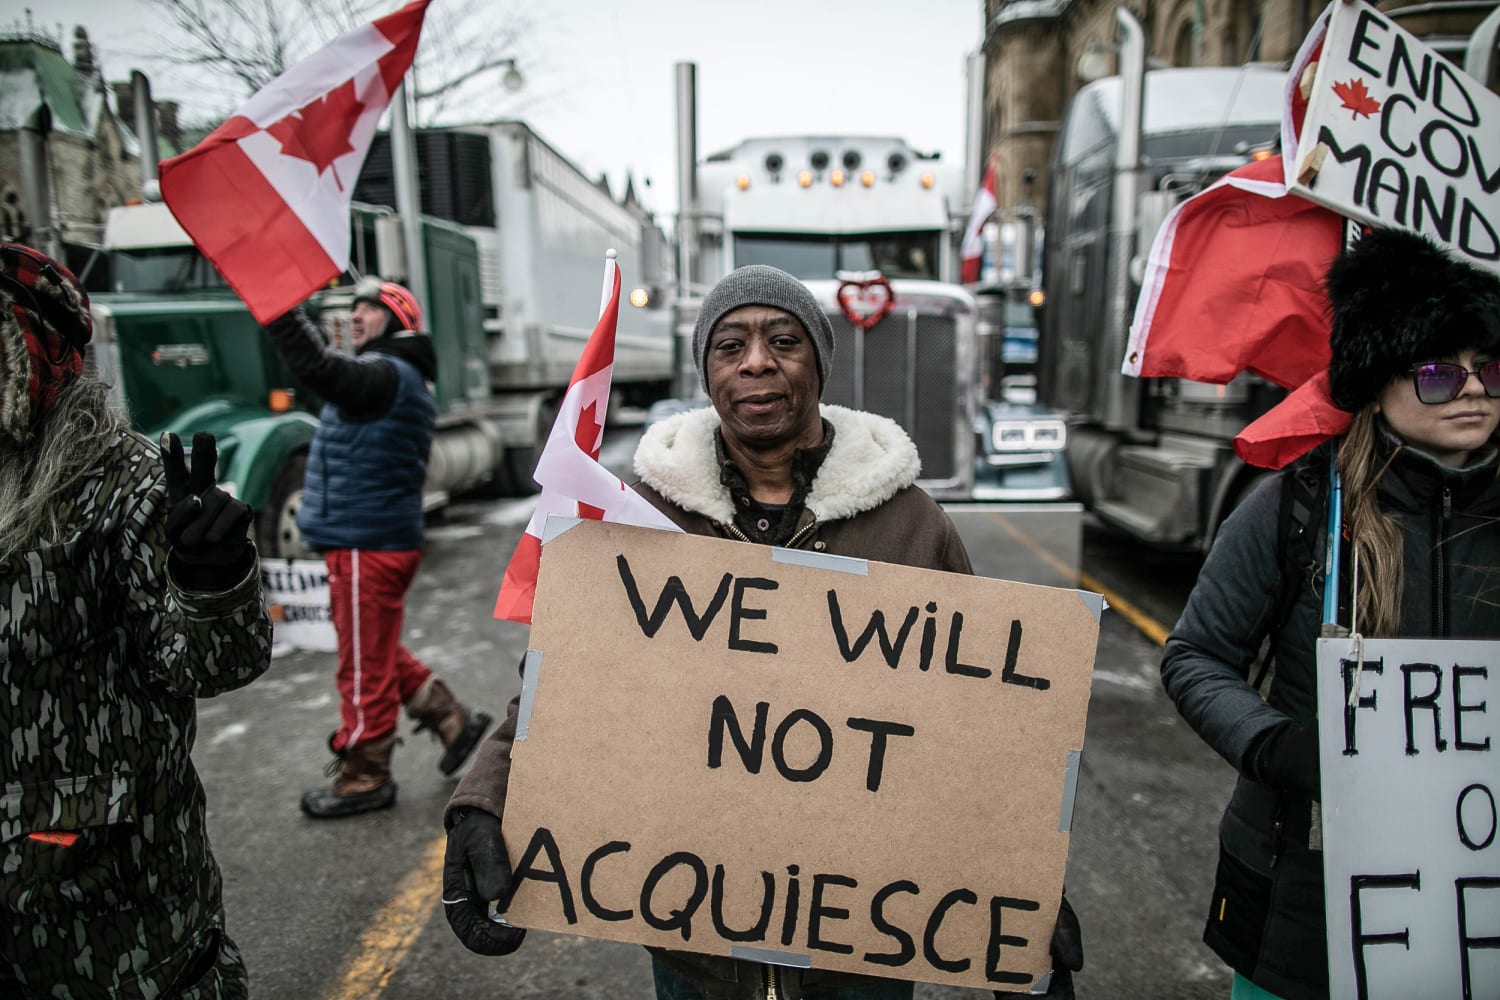 Vuil Benodigdheden bijtend Shachi Kurl : Ottawa state of emergency over trucker protest shows Canada's  Trumpists are growing